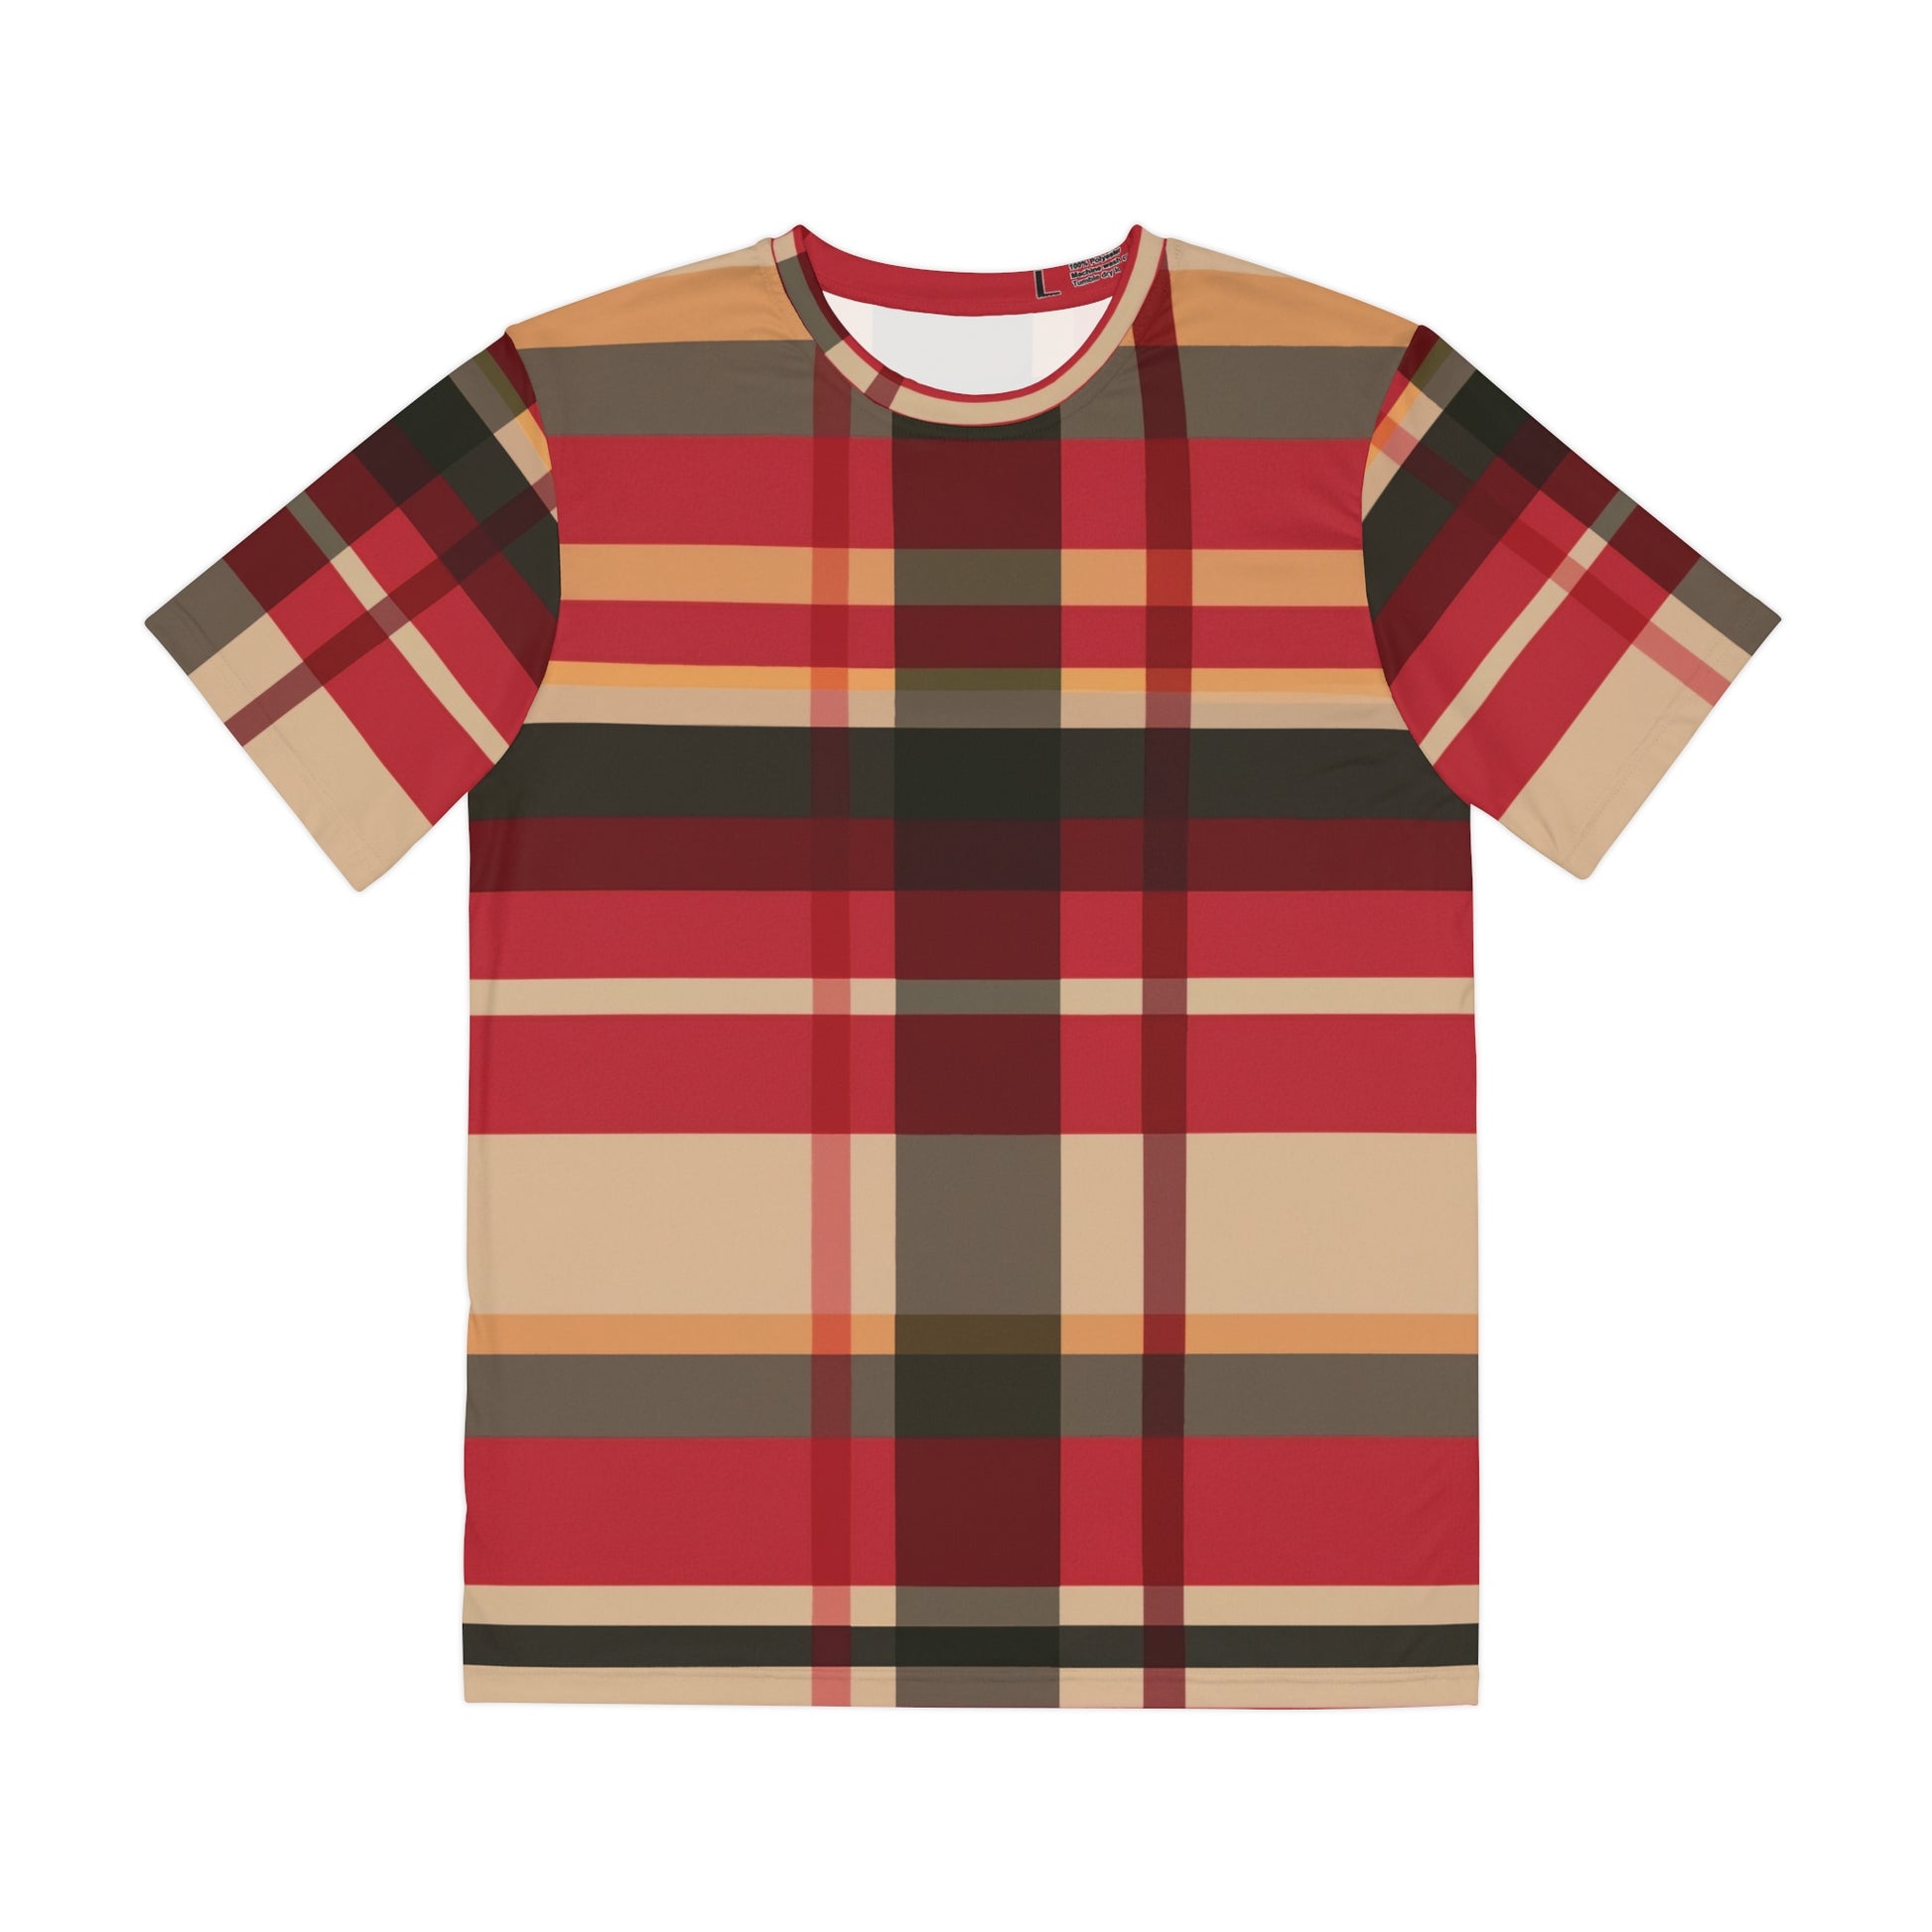 Front side of the McCloud Mist Tartan Crewneck Pullover Short-Sleeved All-Over Print Shirt red black and beige plaid pattern